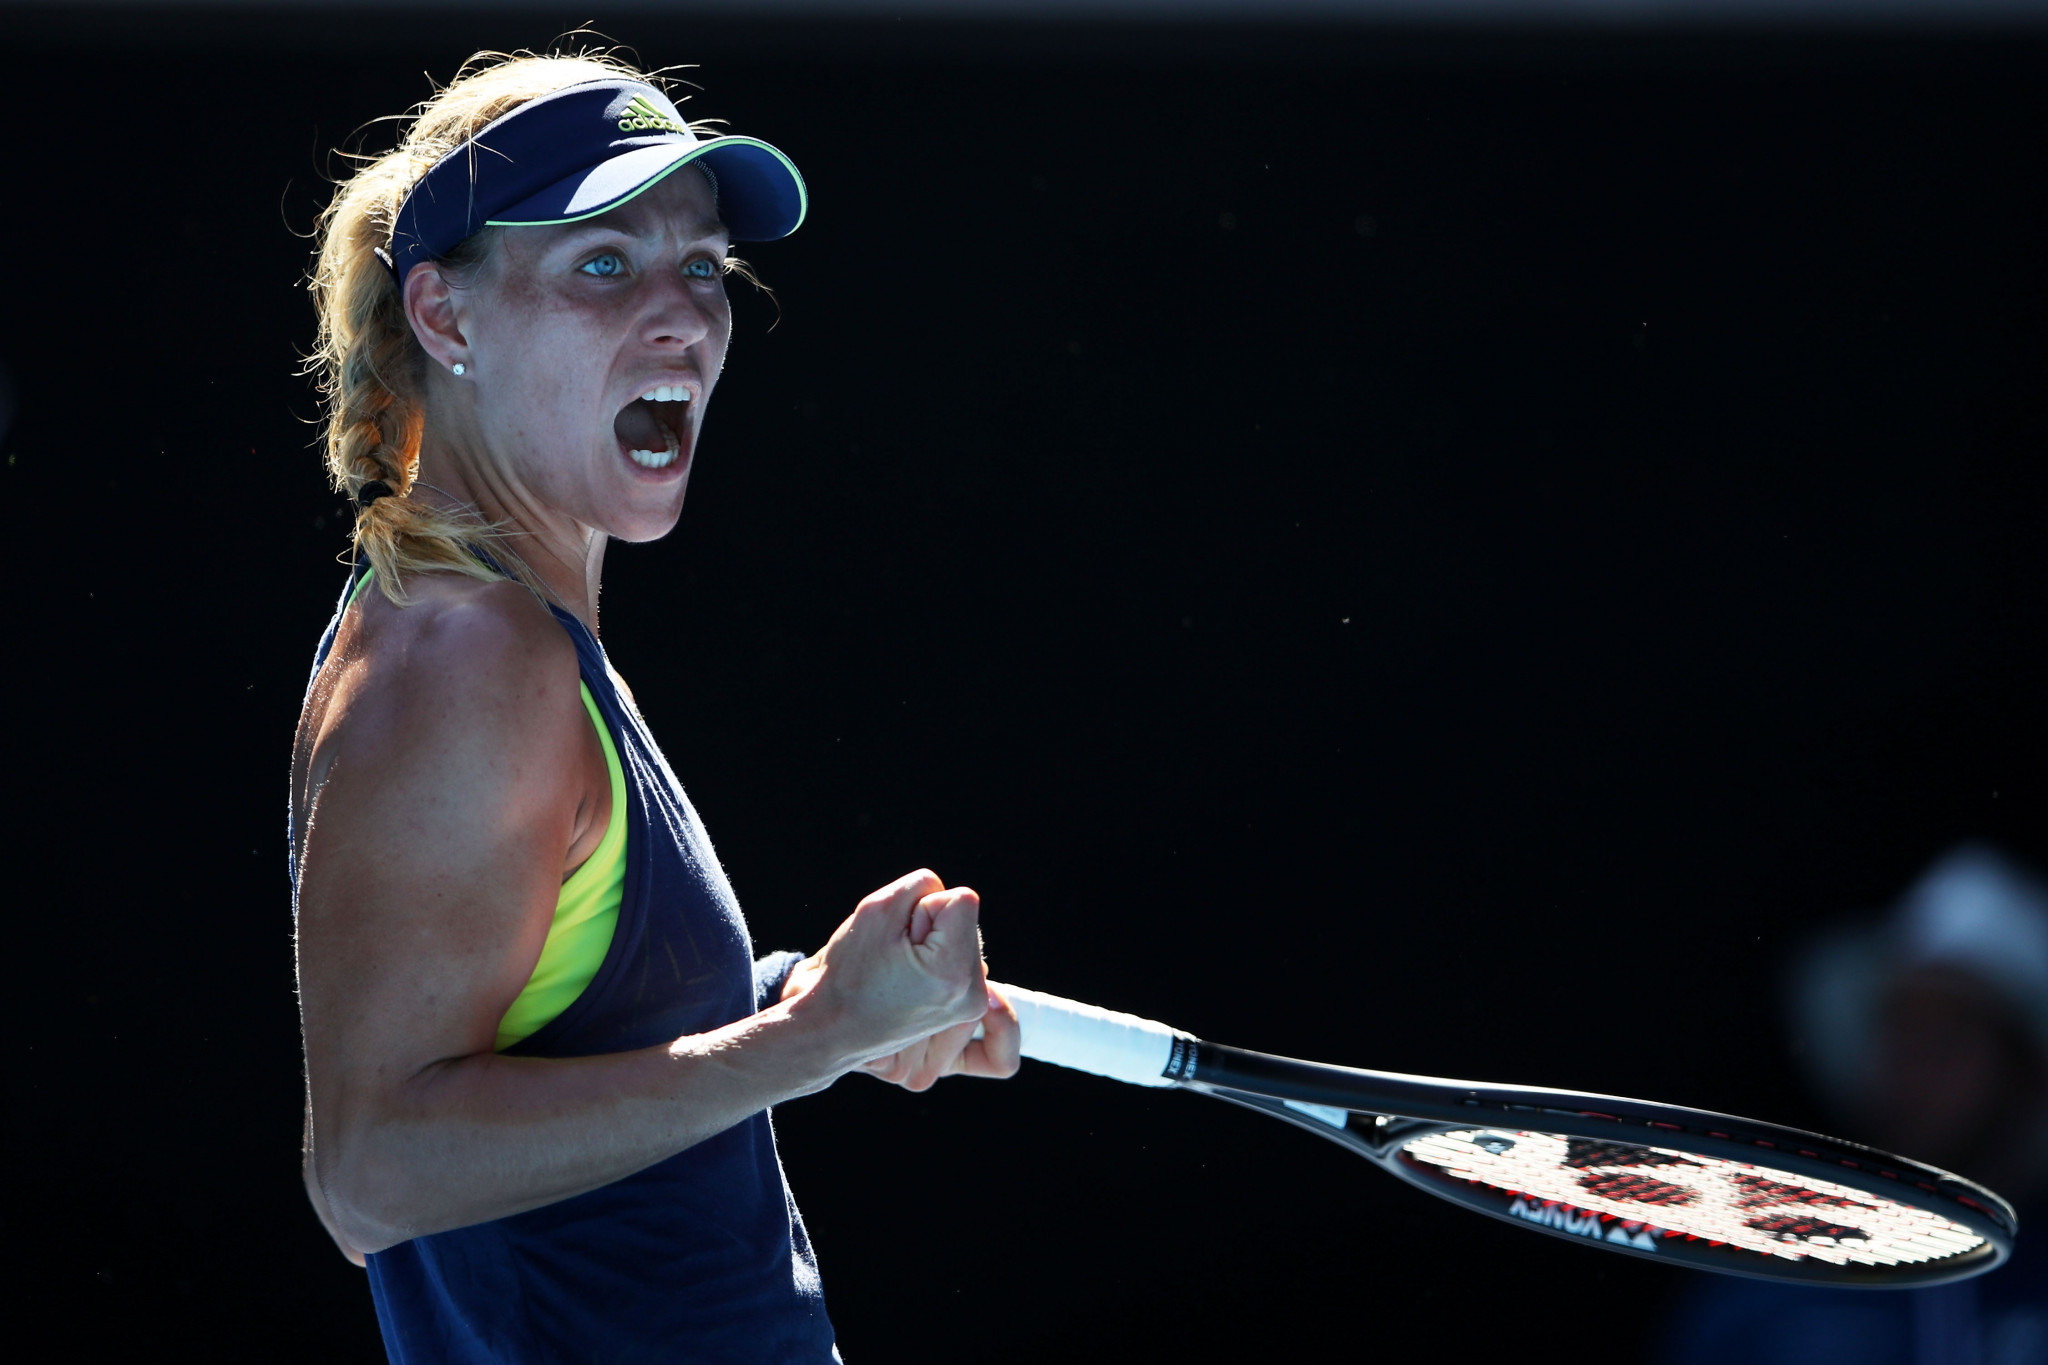 Angelique Kerber came out on top in her match against fellow German Anna-Lena Friedsam ©Getty Images